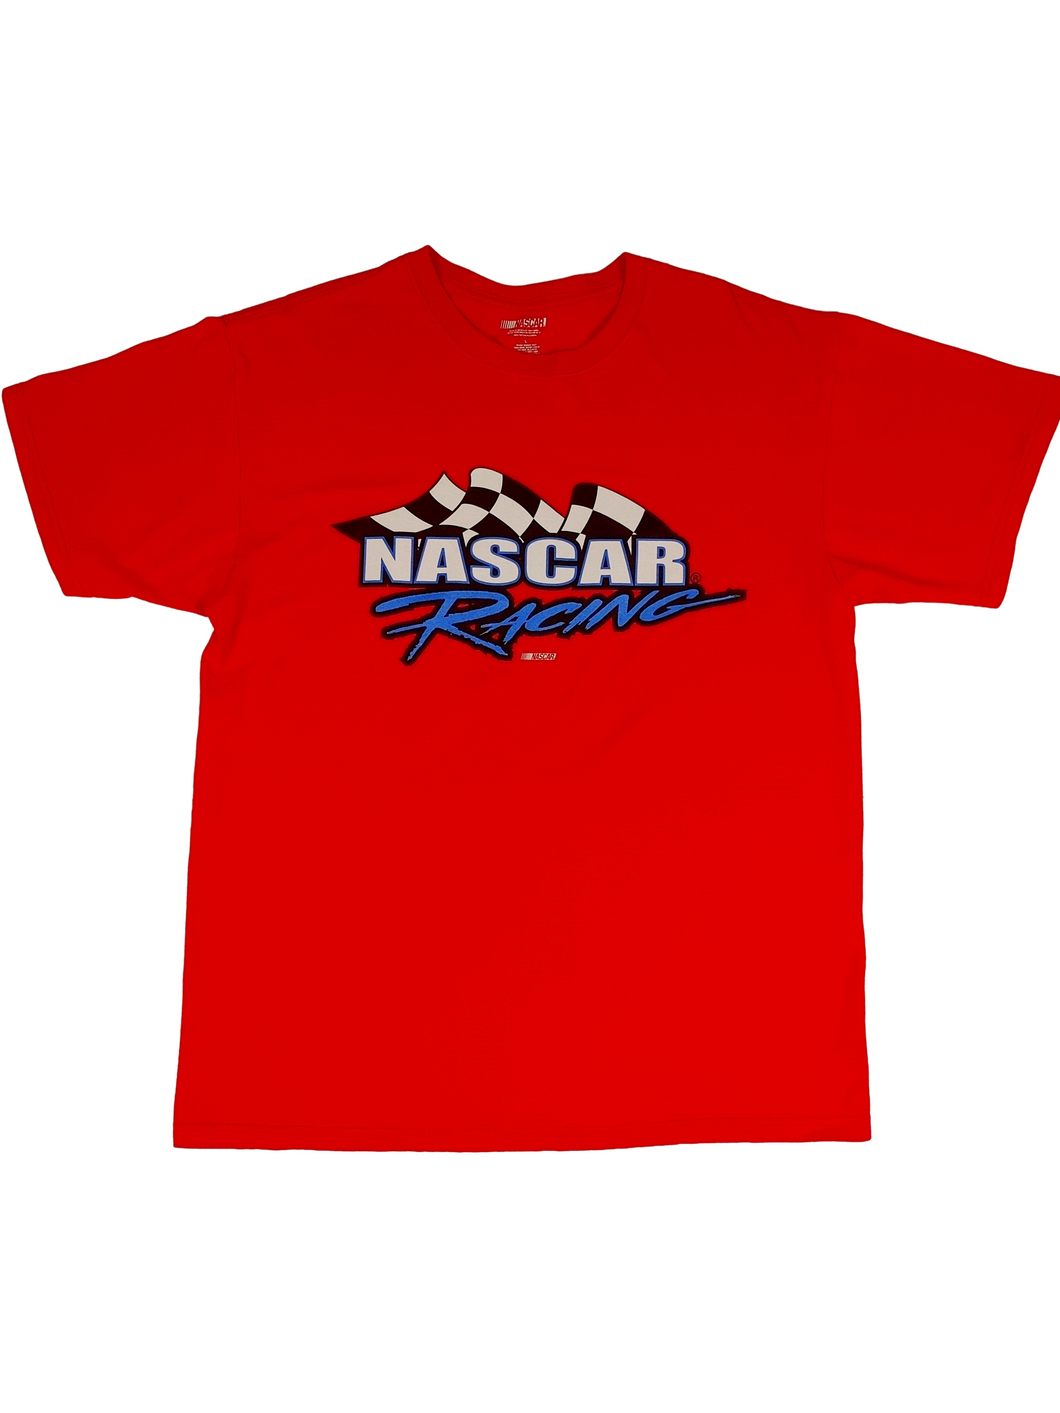 00s Fire Engine Red NASCAR Racing T-shirt - Size L